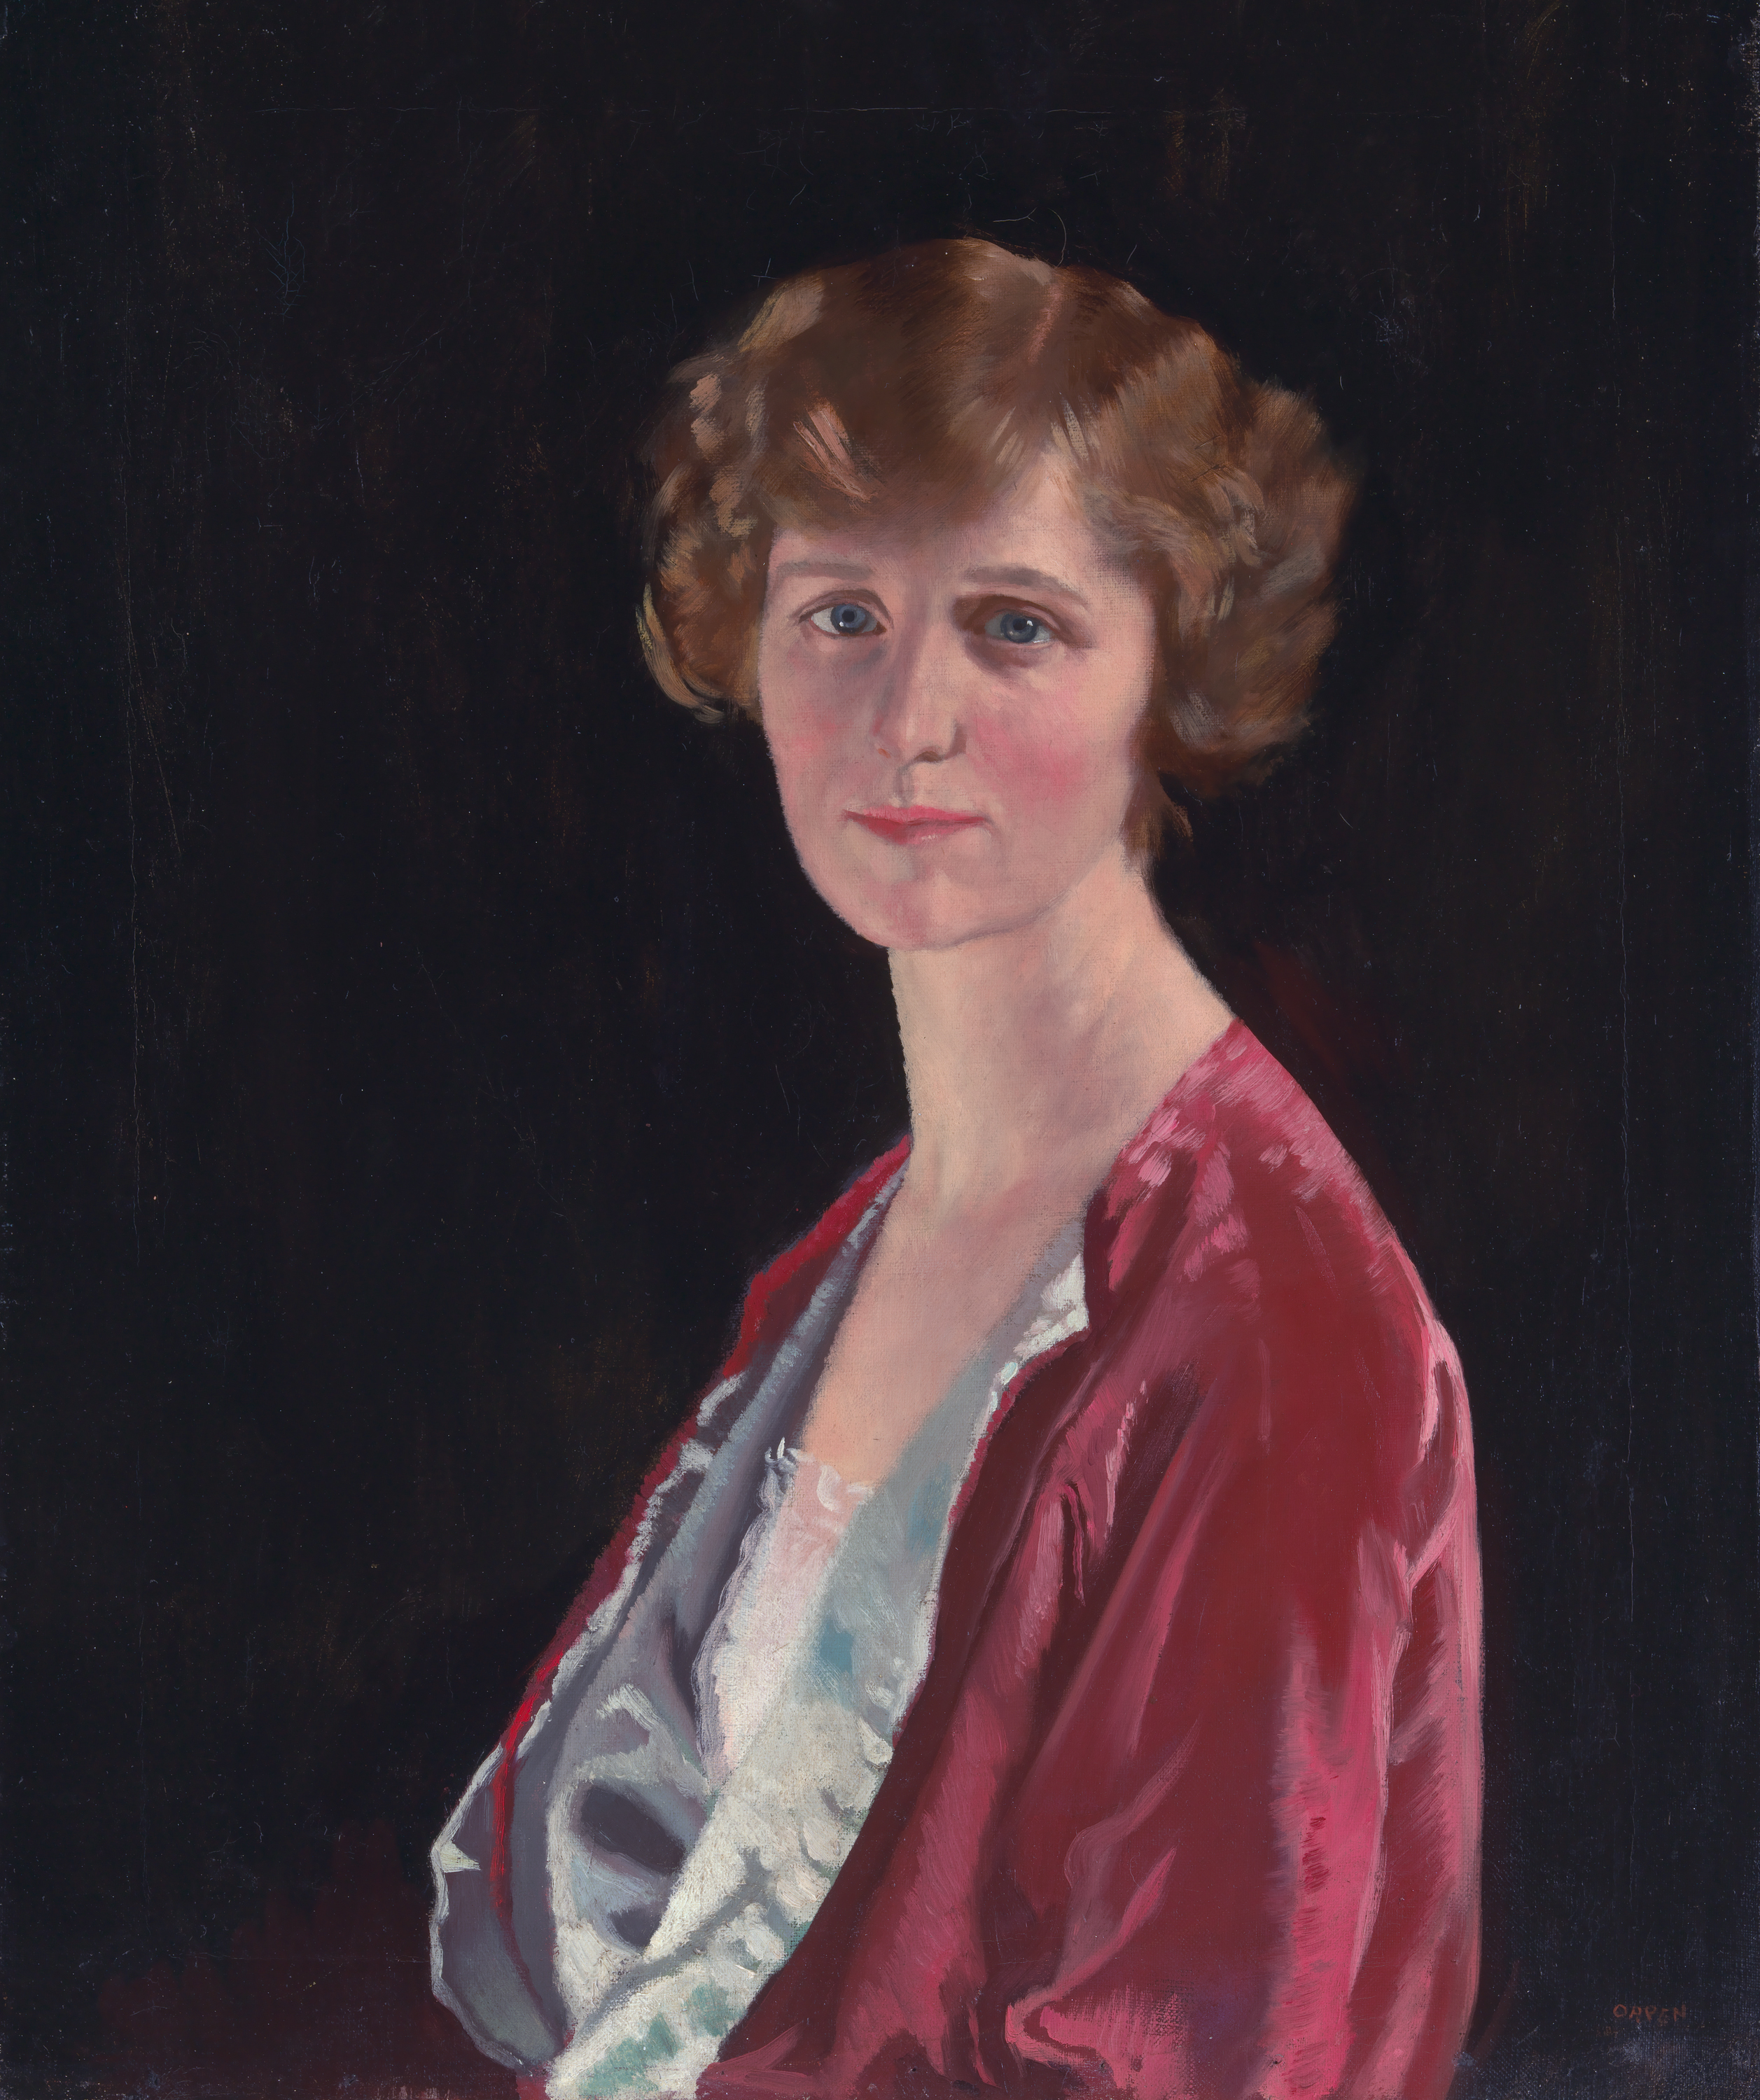 Evelyn Marshall Field (Mrs. Marshall Field III), by William Orpen (1878-1931)